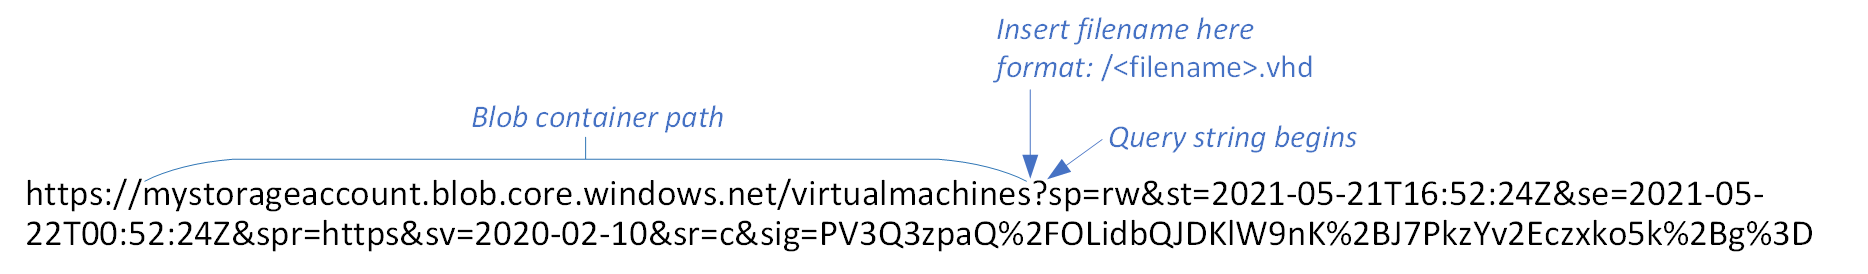 Graphic of a Blob SAS URL, with container path and place to insert the new filename labeled